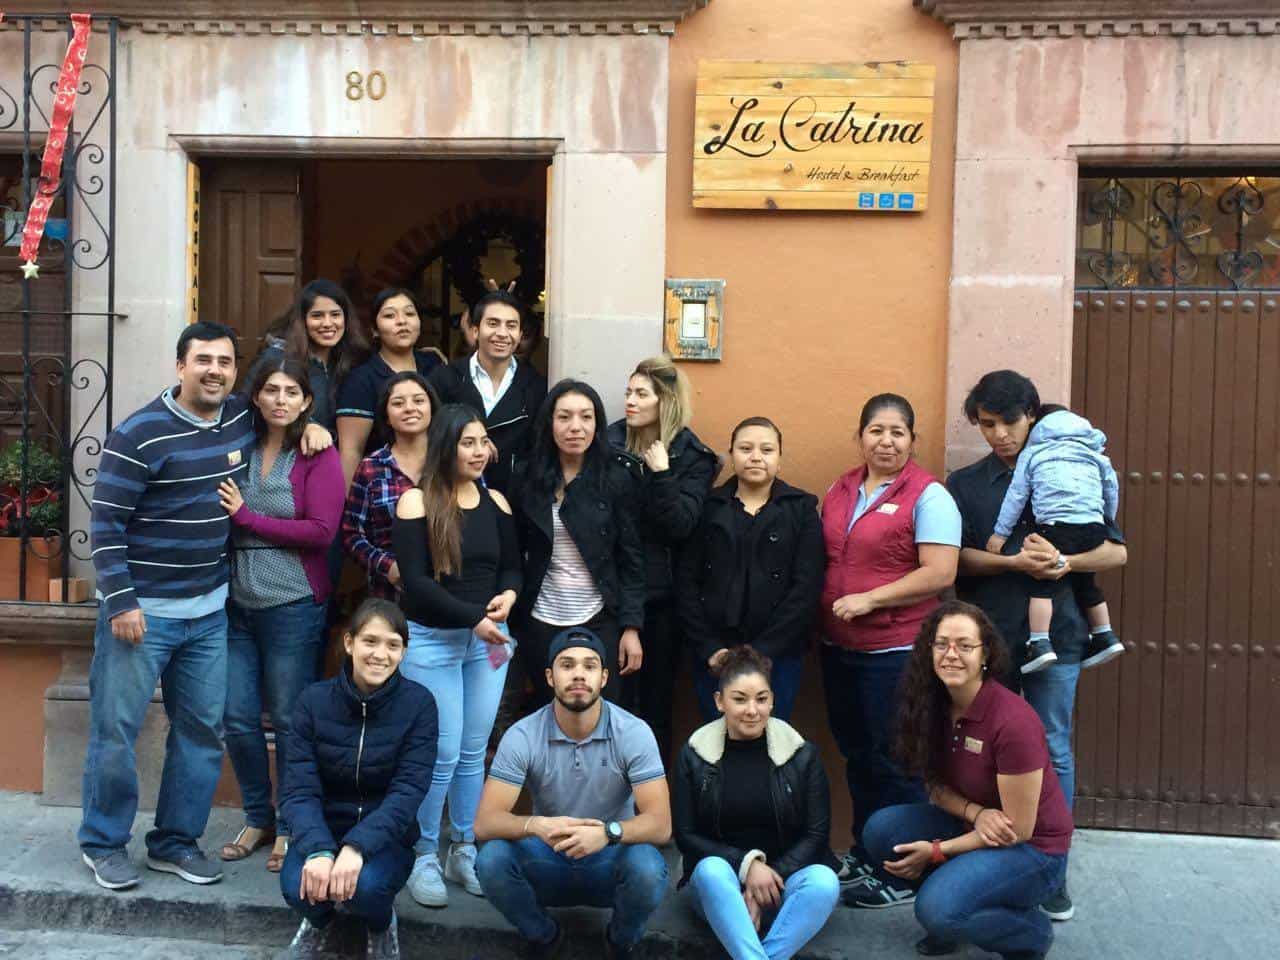 The staff at La Catrina Hostel who made our experience so incredible